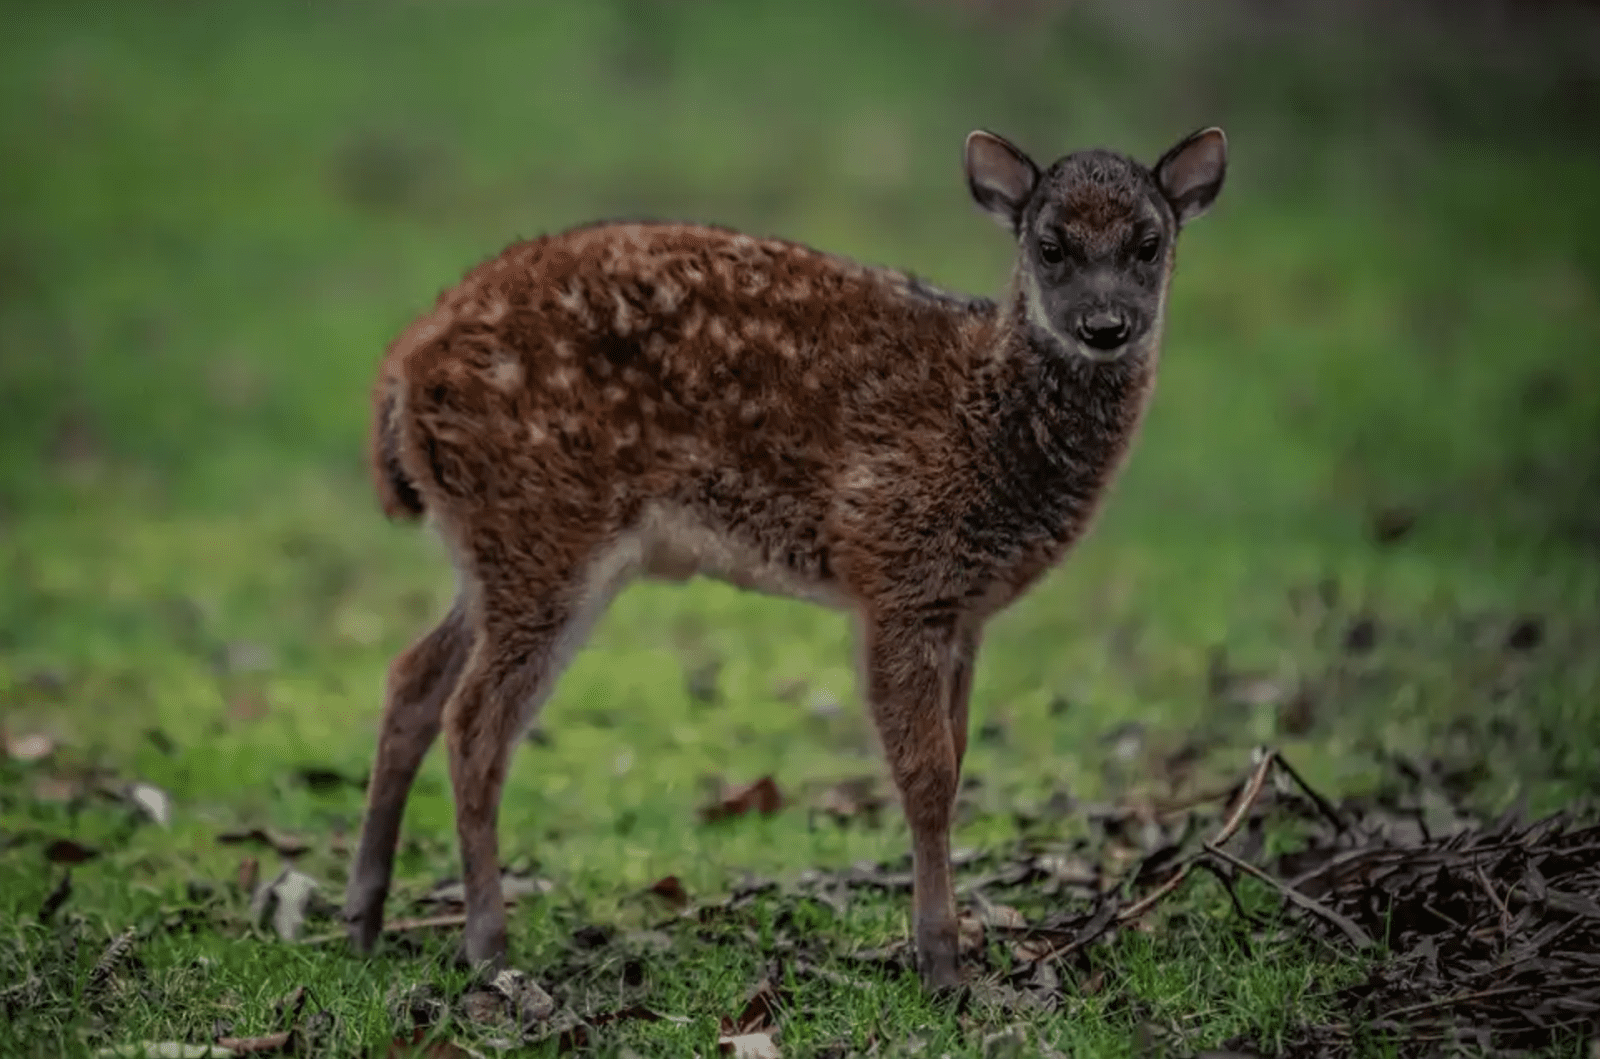 &#8216;Super rare&#8217; endangered baby deer born at Chester Zoo pictured for the first time, The Manc